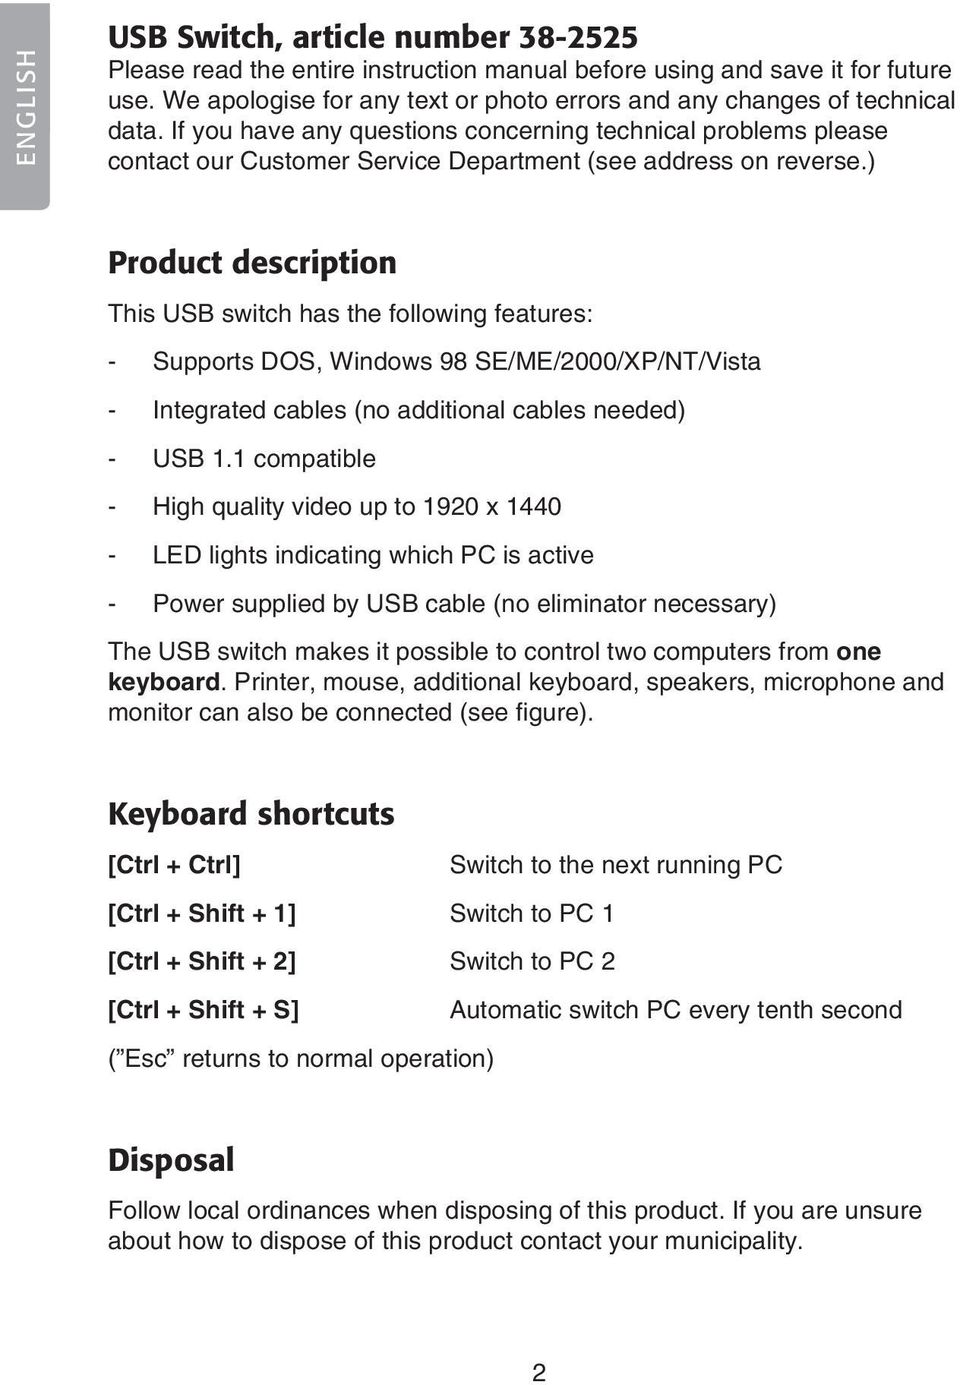 ) Product description This switch has the following features: - Supports DOS, Windows 98 SE/ME/2000/XP/NT/Vista - Integrated cables (no additional cables needed) - 1.